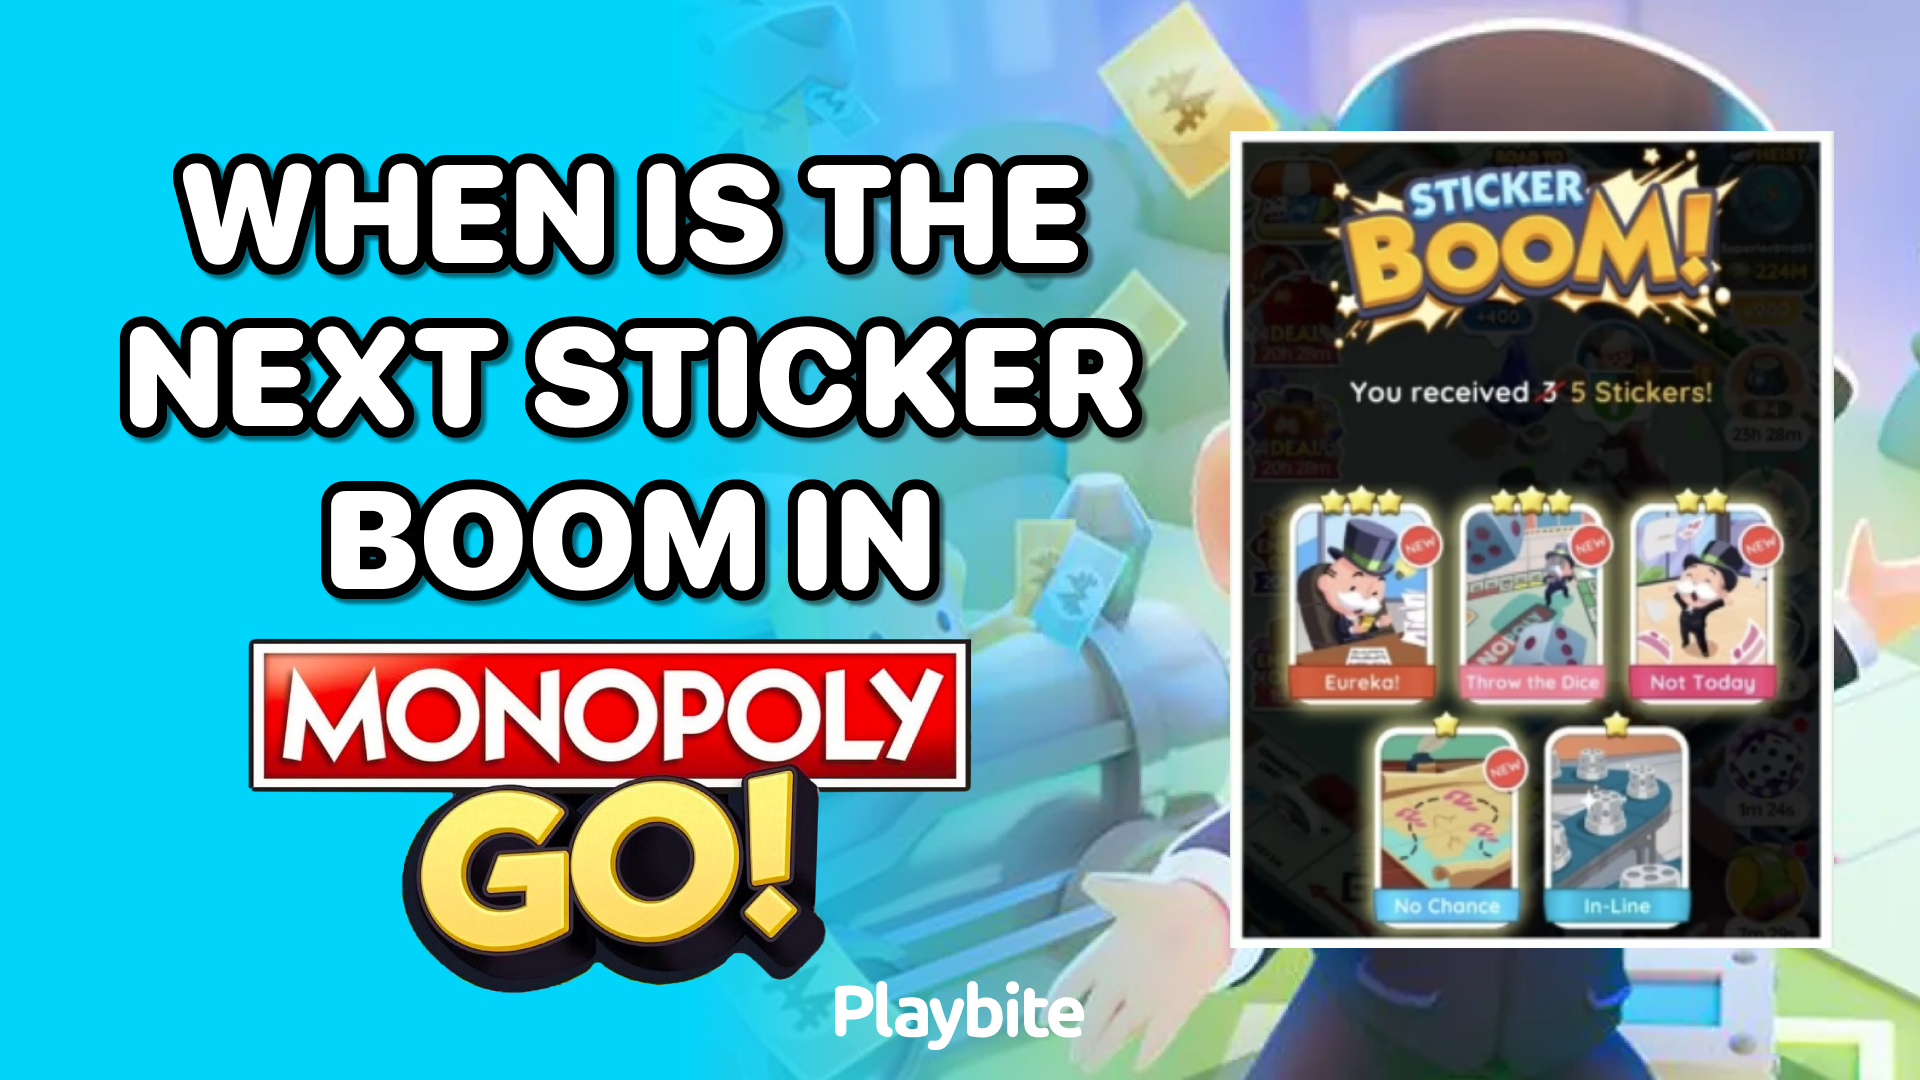 When Is the Next Sticker Boom in Monopoly Go?